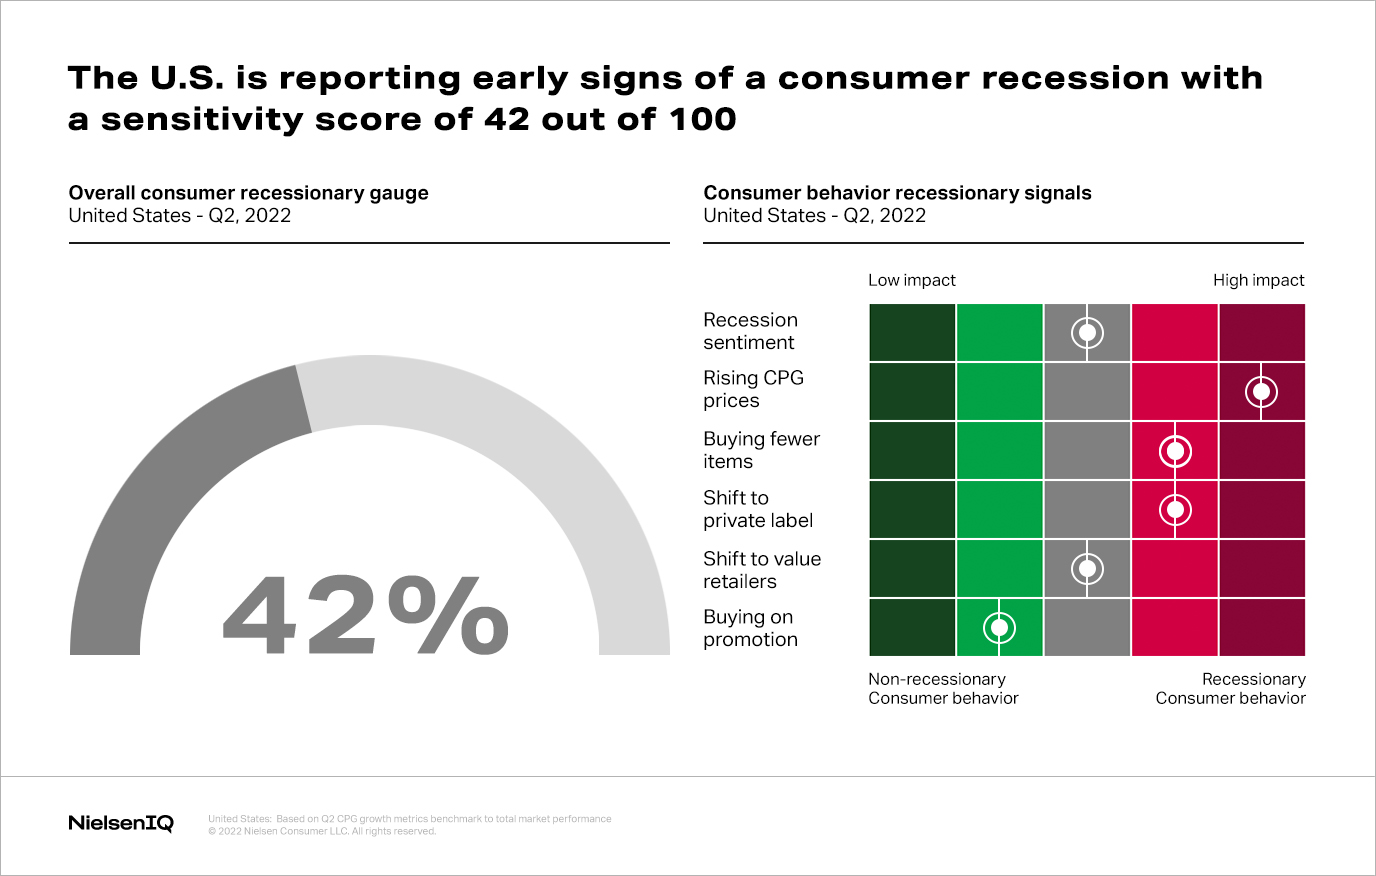 A chart showing that the U.S. is 42% of the way to a consumer recession.